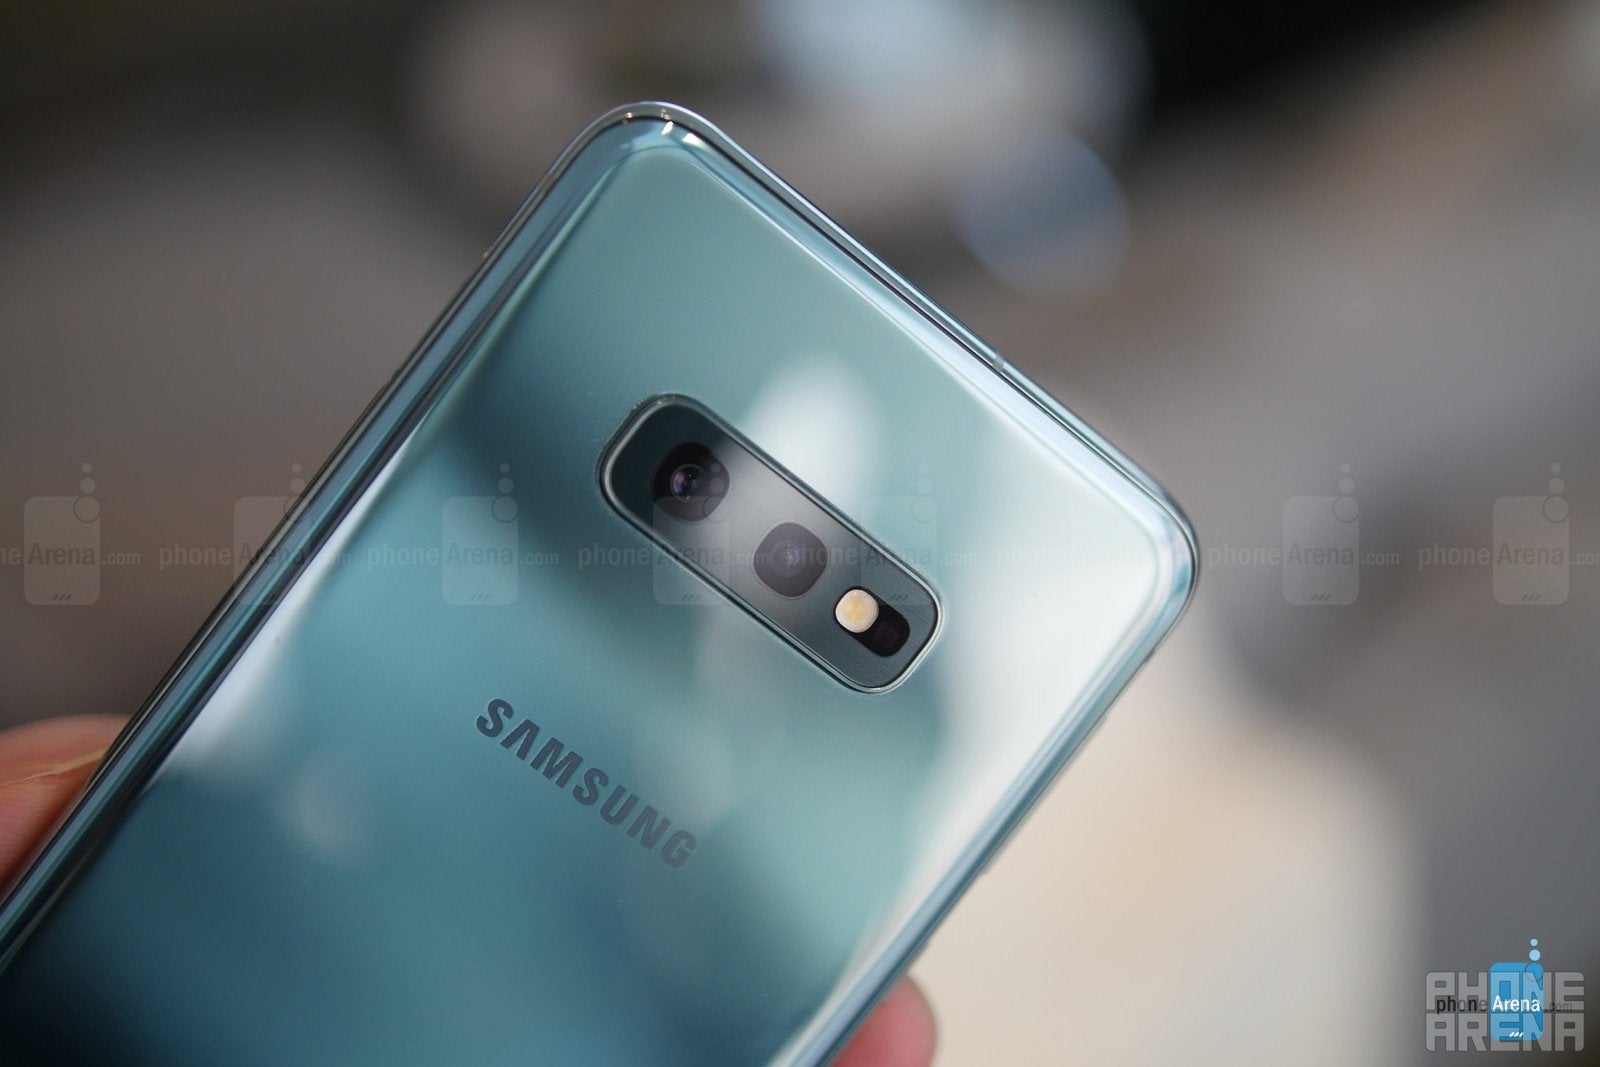 Samsung Galaxy S10e hands-on: Big features in a smaller package